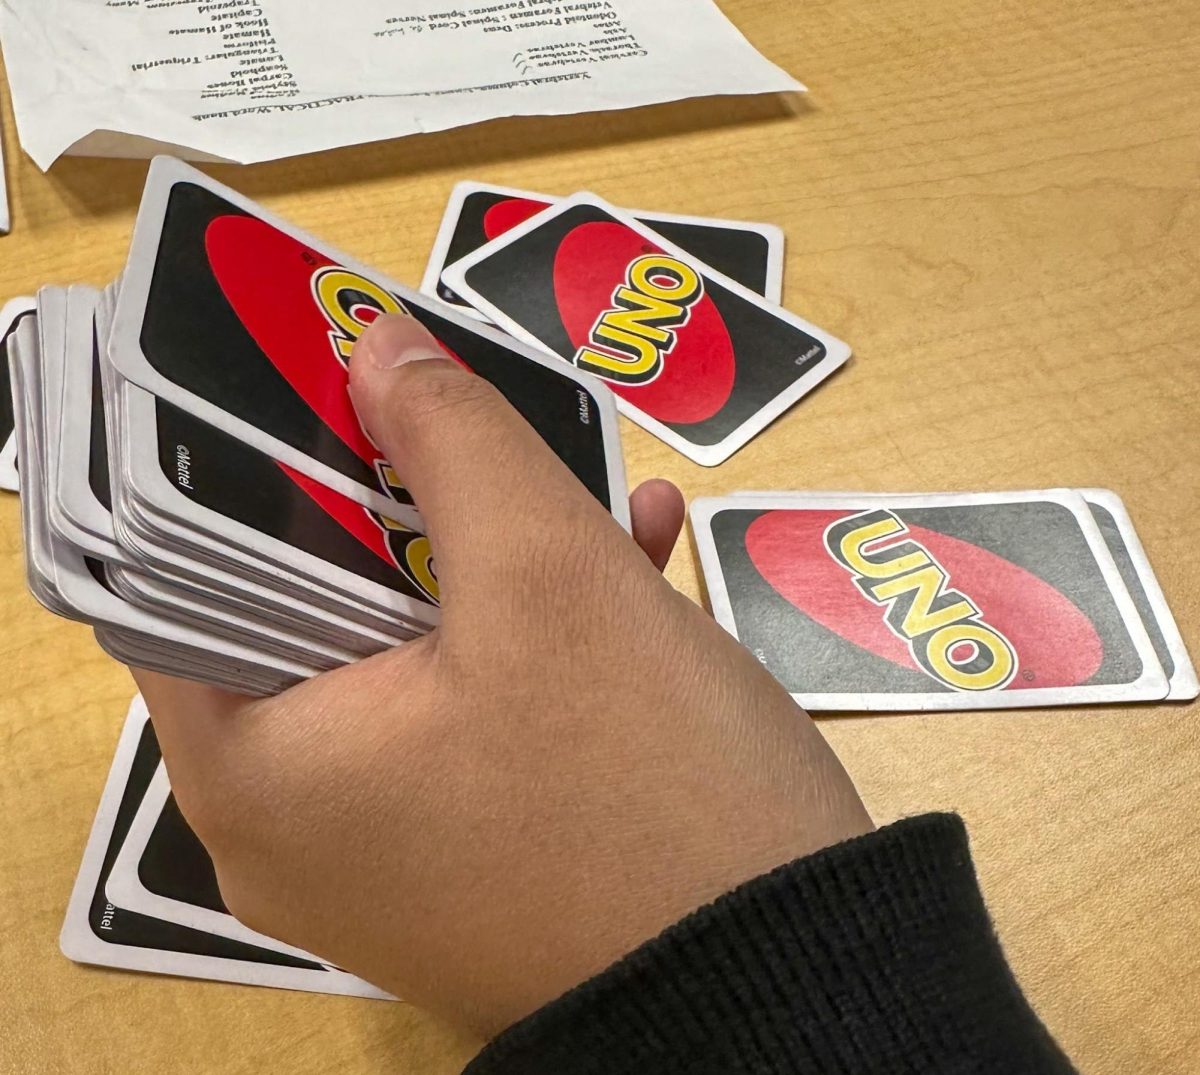 Deck of Uno cards